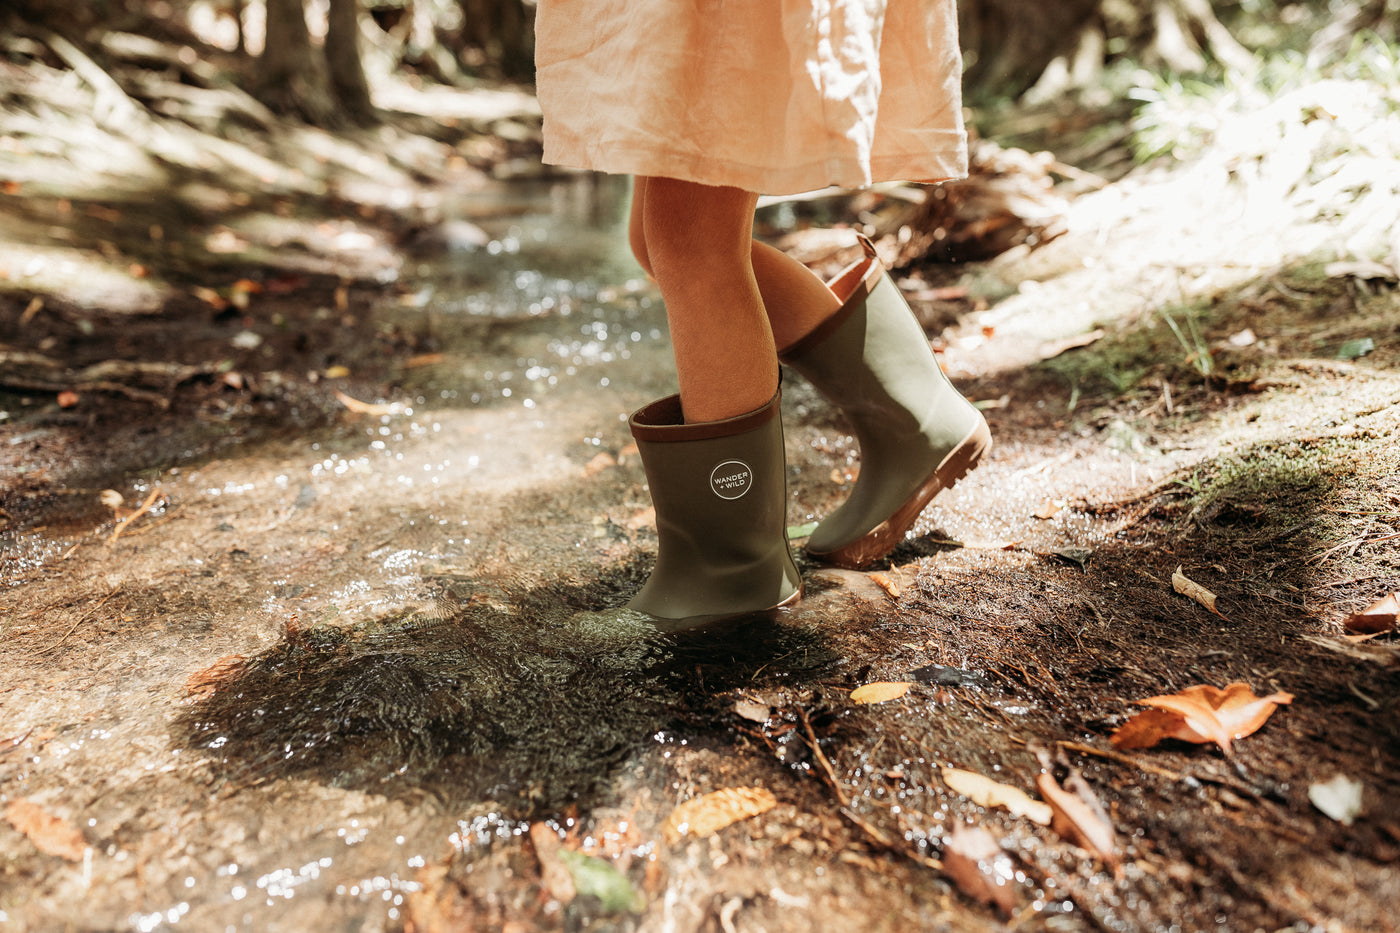 Forest Natural Rubber Gumboots